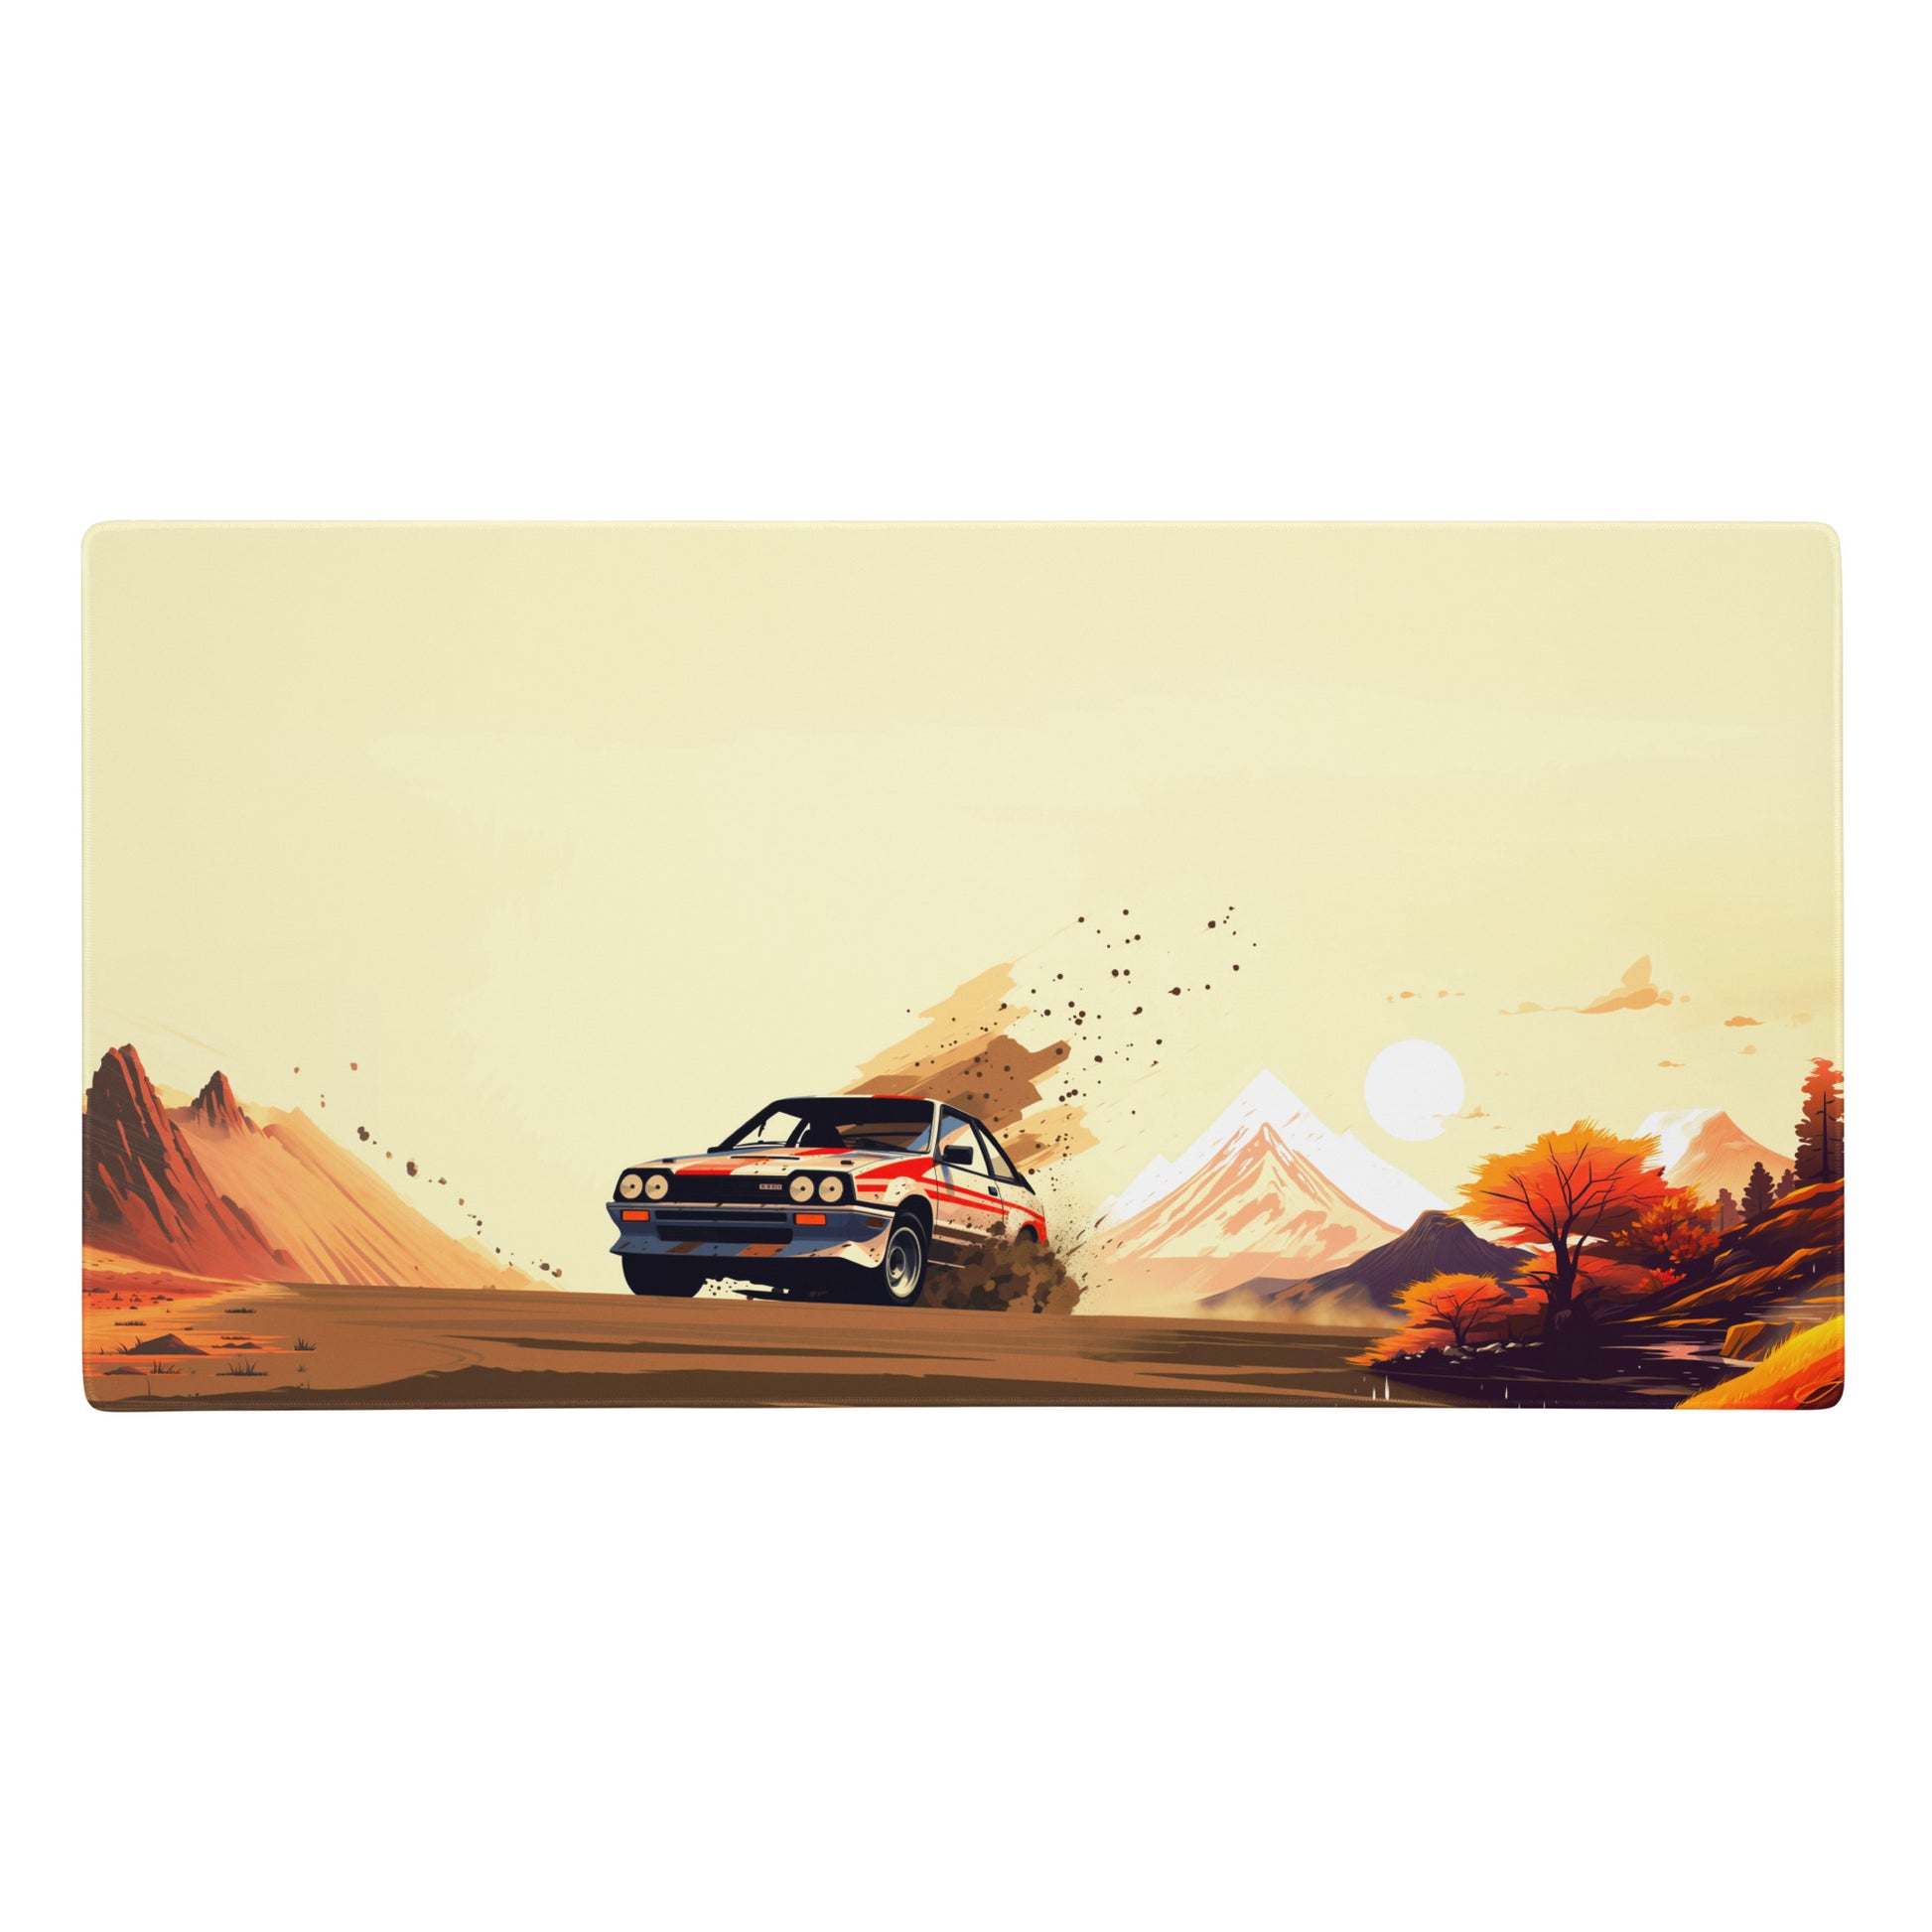 A 36" x 18" gaming desk pad with a Rally car racing through the desert. Brown and Beige in Color. 